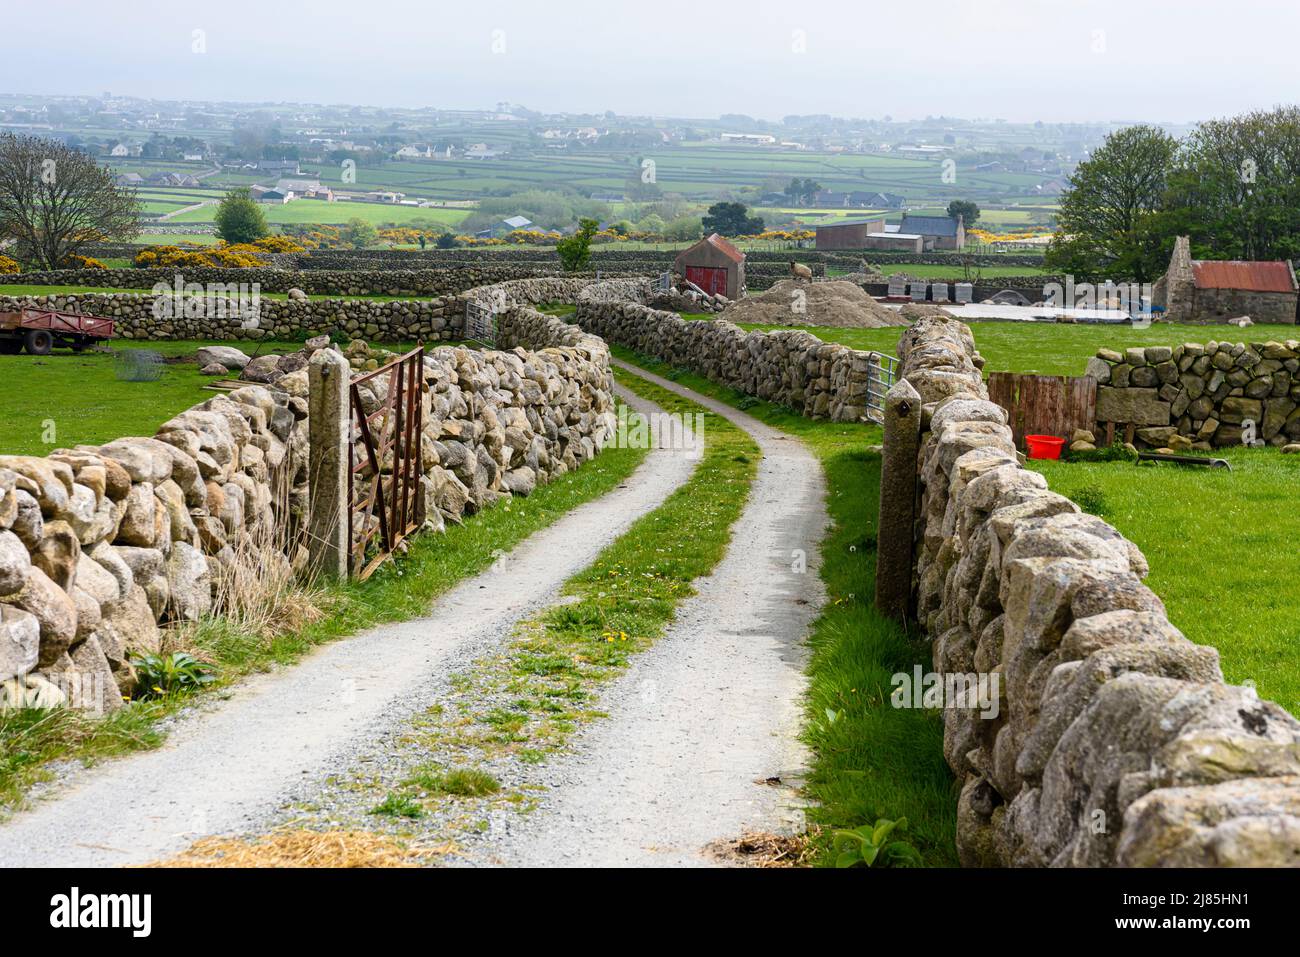 Lane with traditional dry stone walls, common around the Mourne Mountains, Northern Ireland. Stock Photo